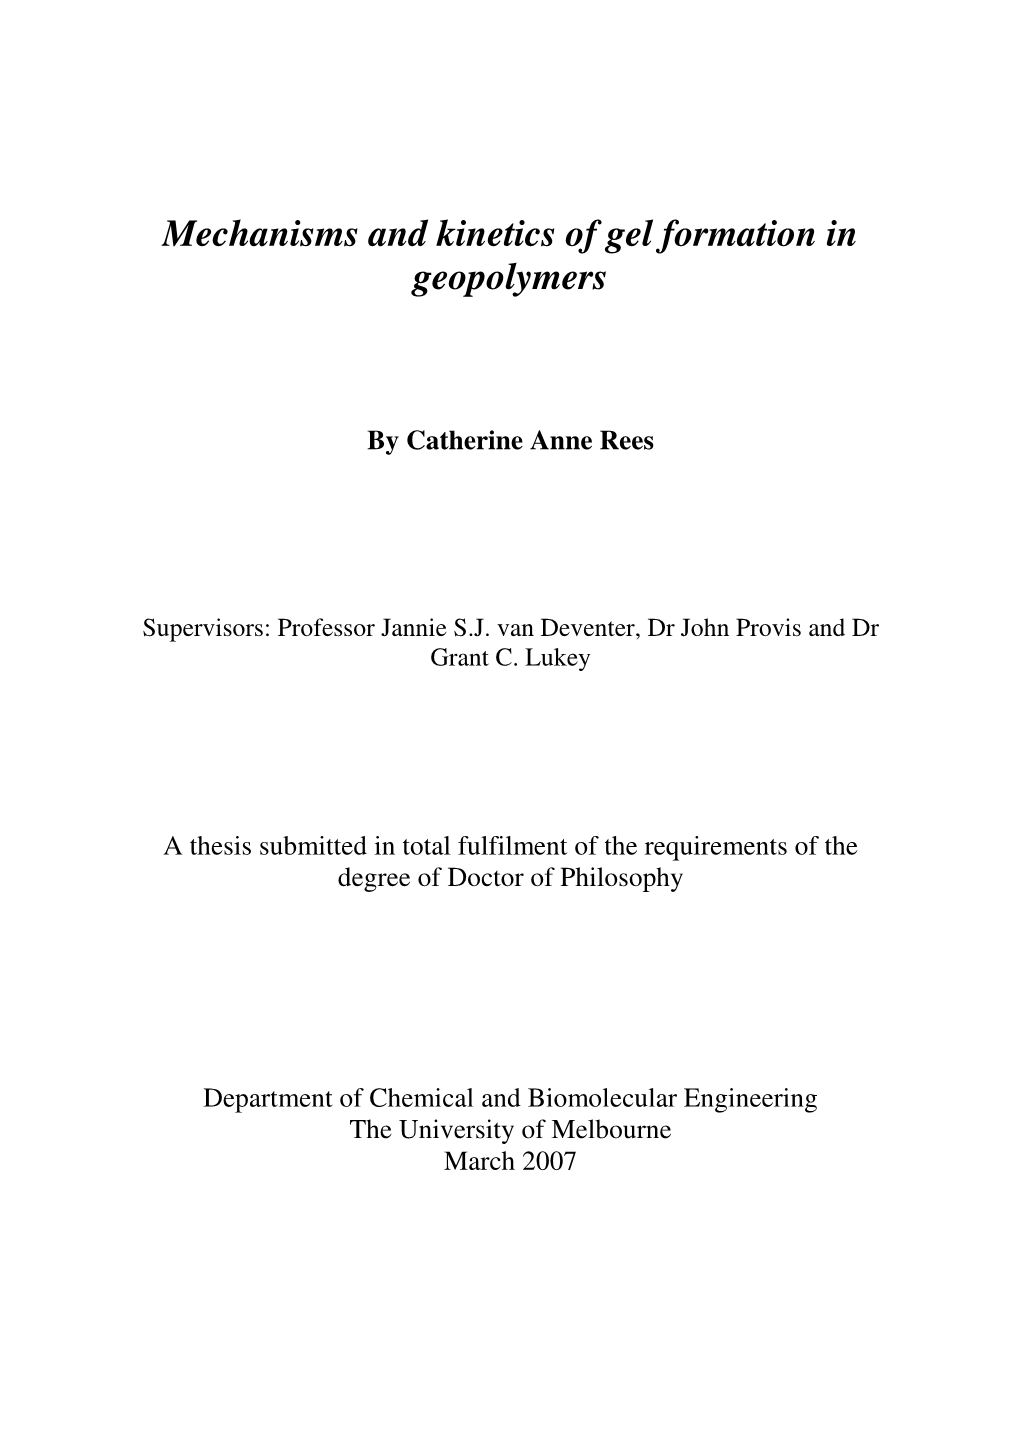 Mechanisms and Kinetics of Gel Formation in Geopolymers